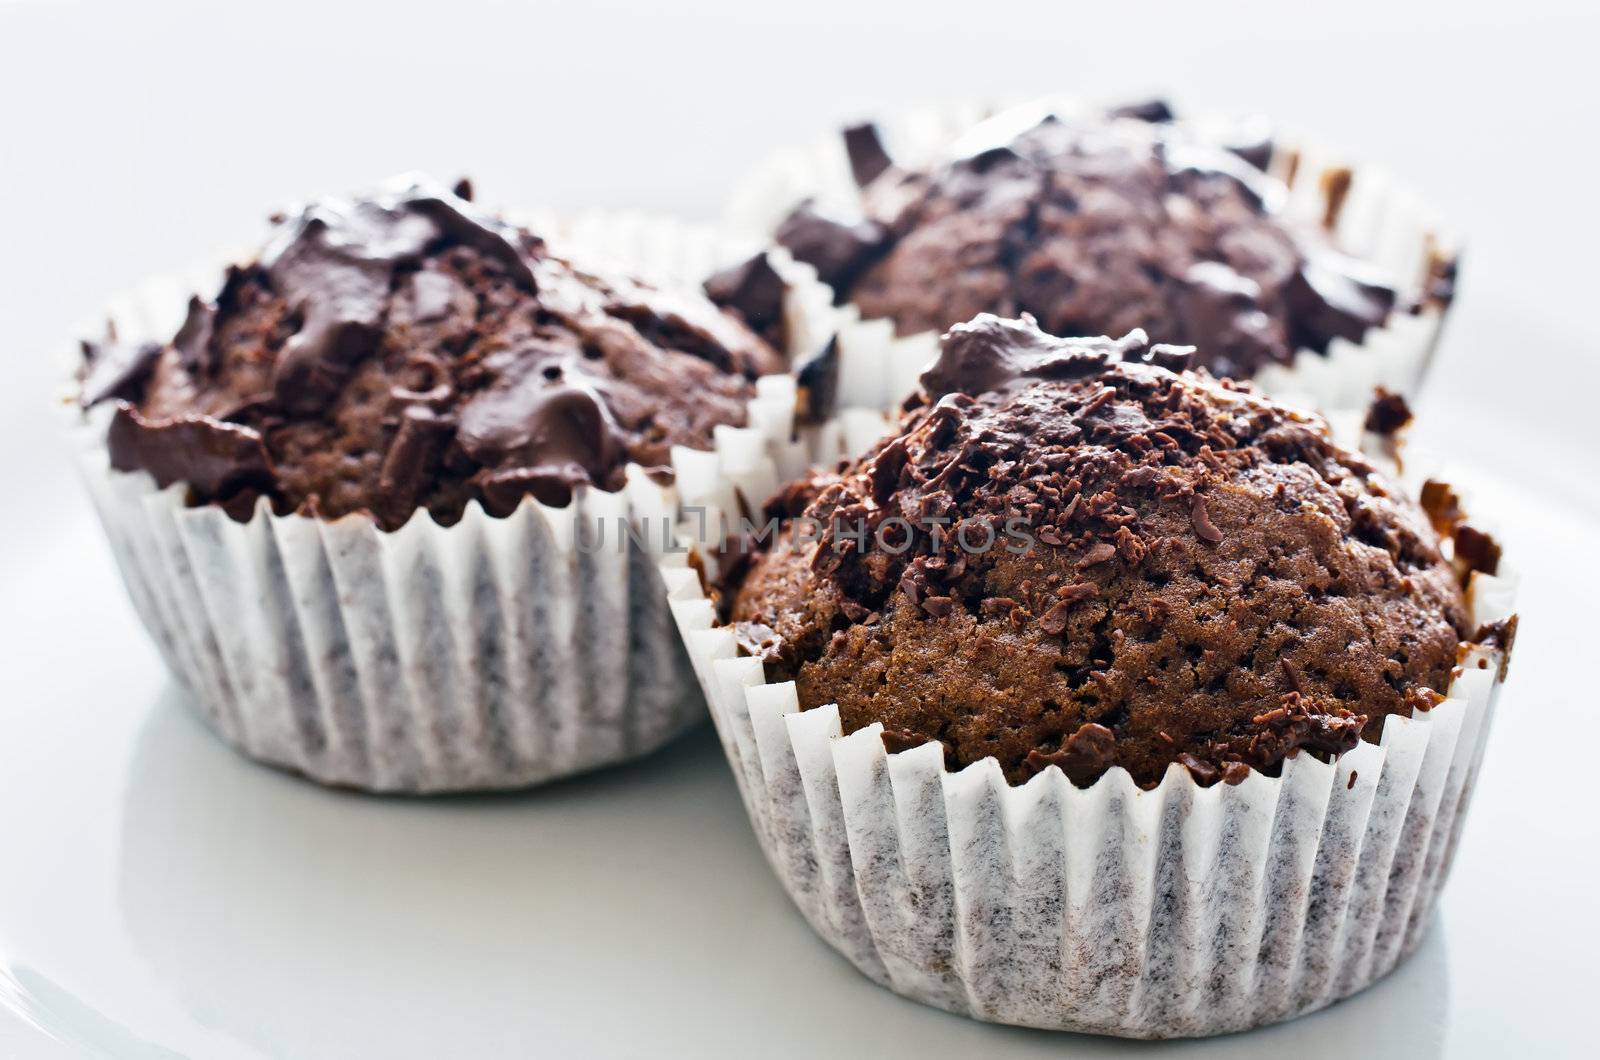 Chocolate muffins on the plate, high key, shallow DOF